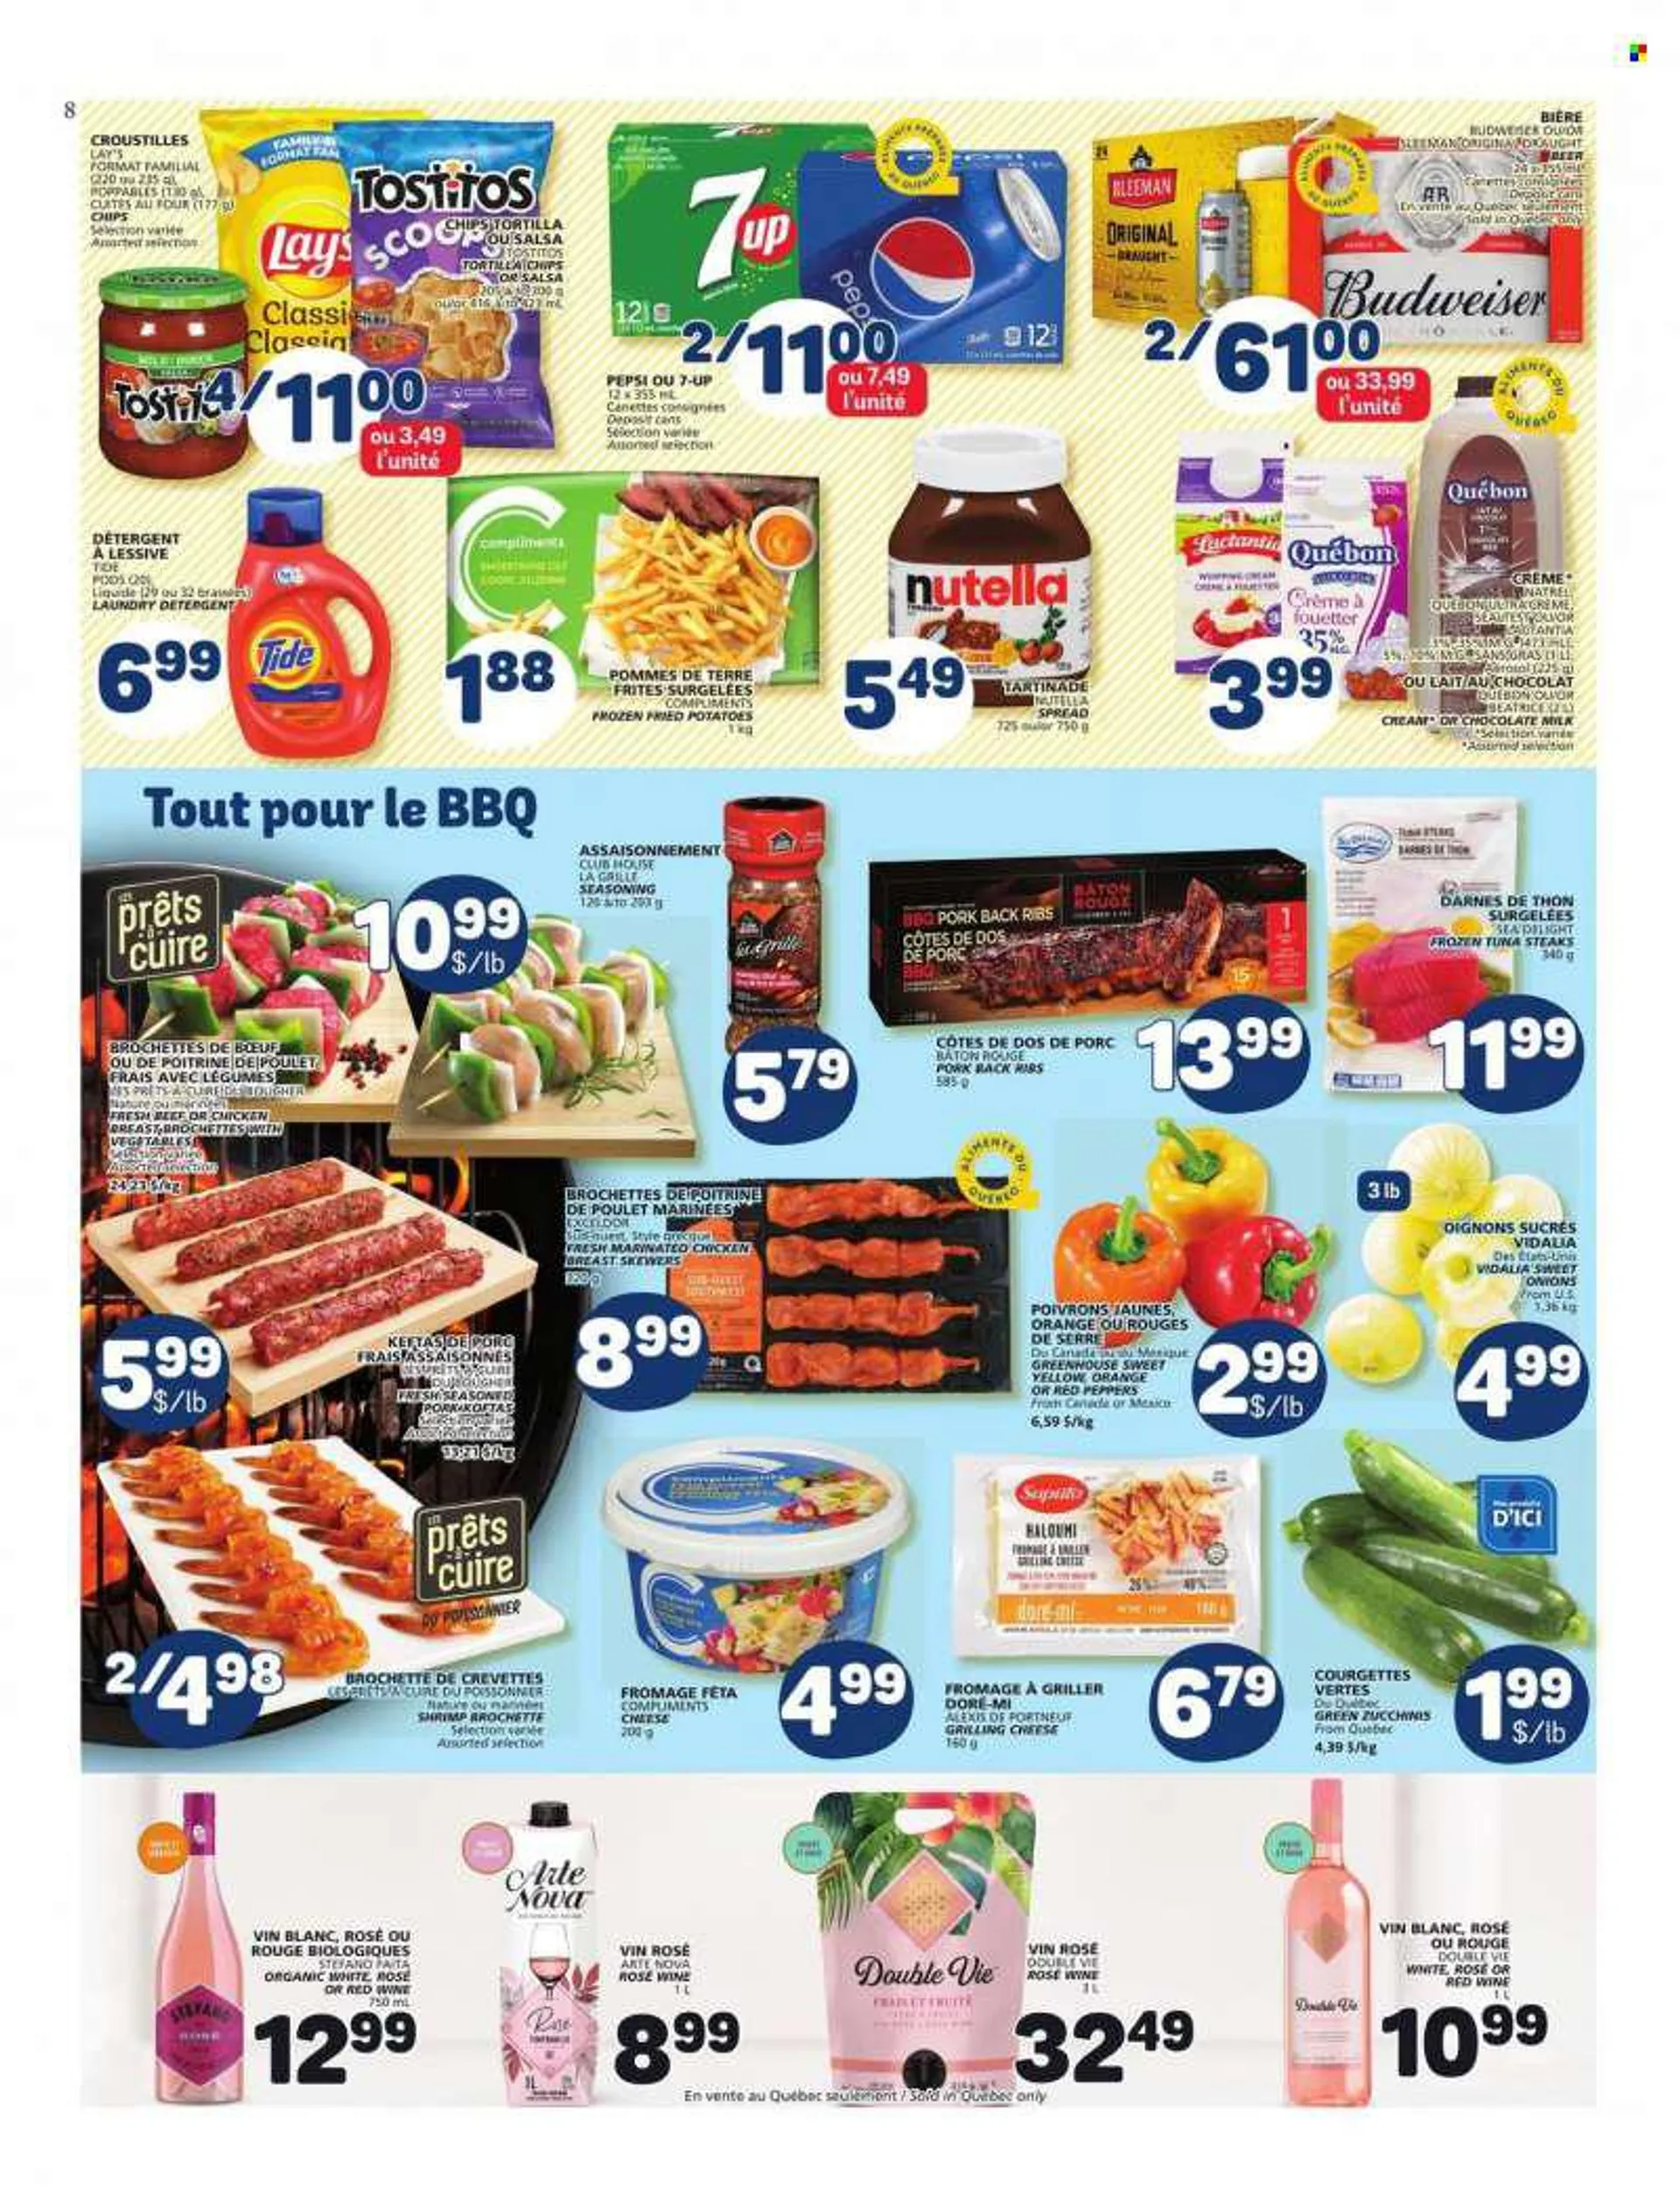 Marché Bonichoix Flyer - June 23, 2022 - June 29, 2022 - Sales products - potatoes, peppers, red peppers, tuna, shrimps, cheese, feta cheese, milk, whipping cream, milk chocolate, chocolate, tortilla chips, Lays, Tostitos, spice, salsa, Pepsi, 7UP, red wi